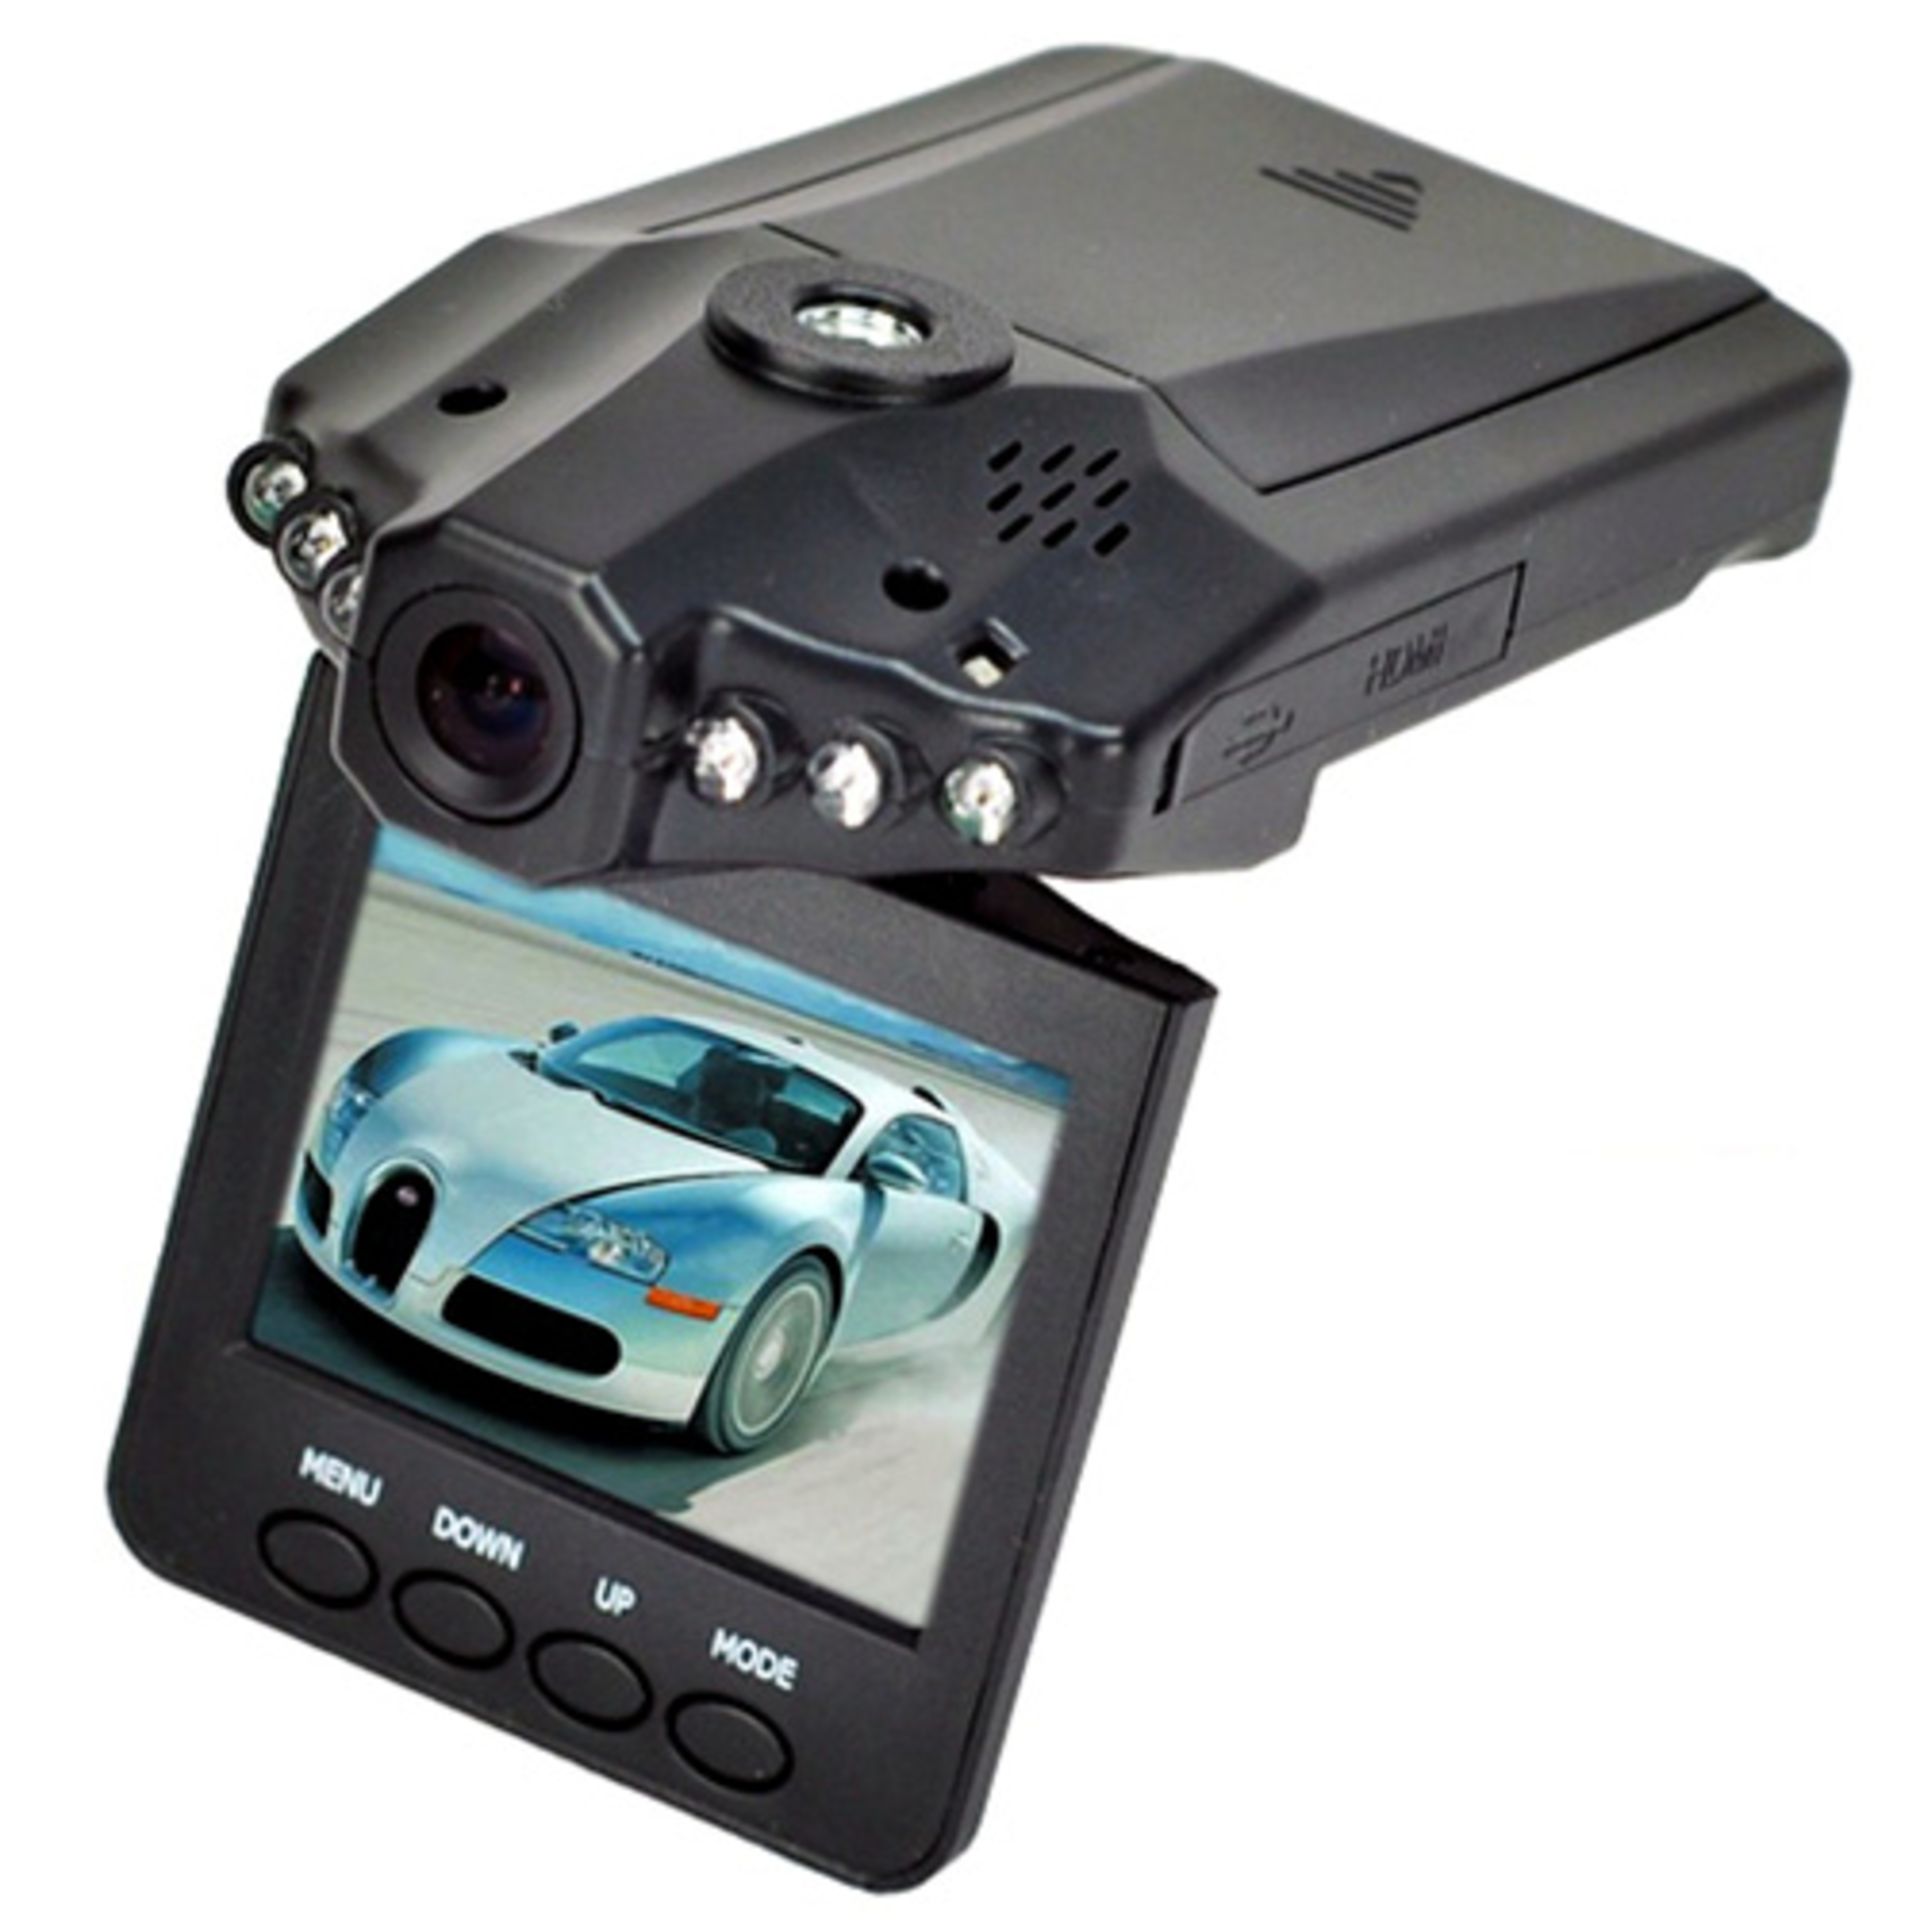 V *TRADE QTY* Brand New HD Portable DVR Dashboard Camera With 2.5" TFT LCD Screen X 4 YOUR BID PRICE